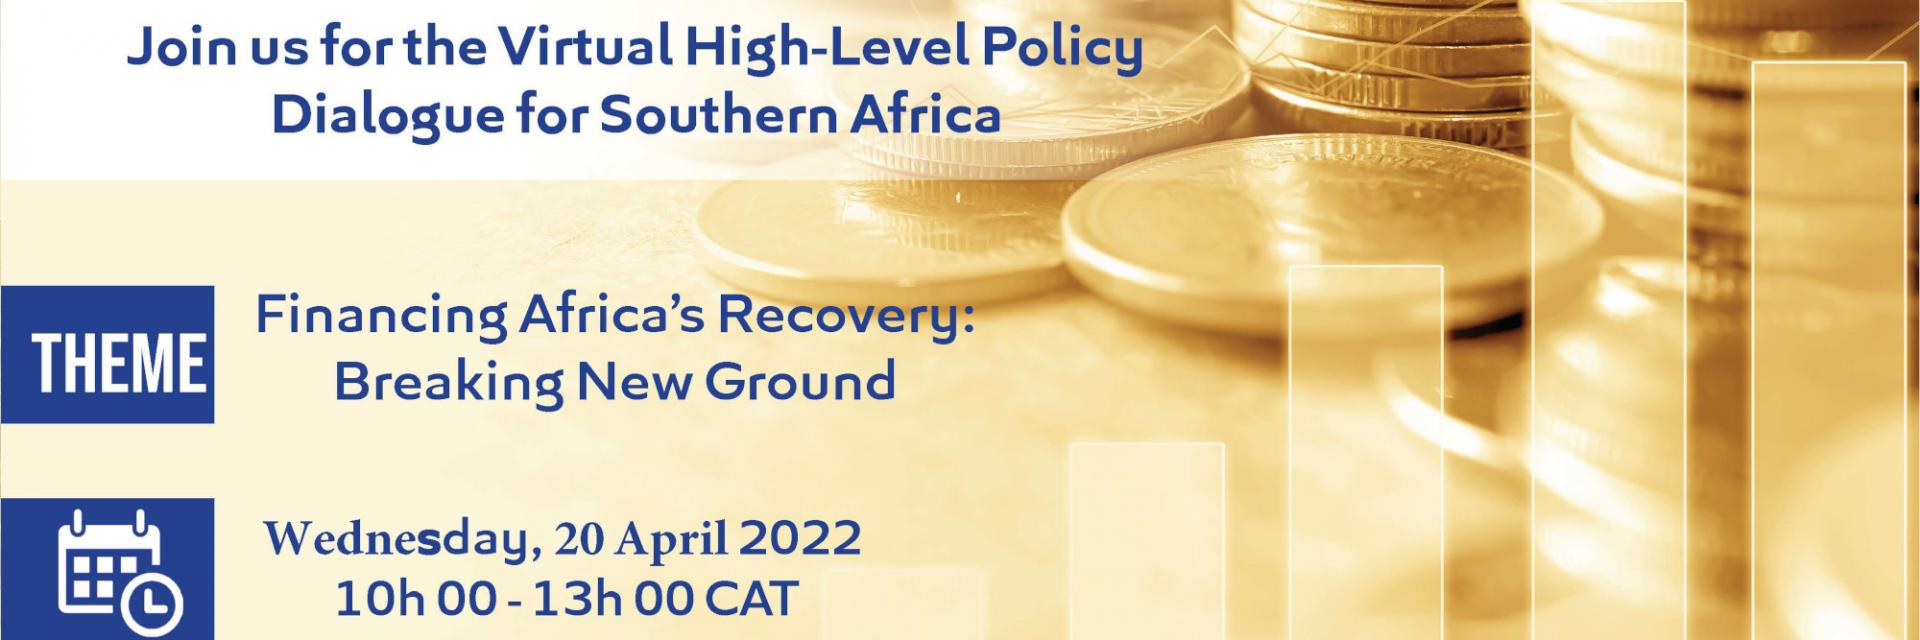 High-Level Dialogue for Southern Africa on Financing Africa’s recovery